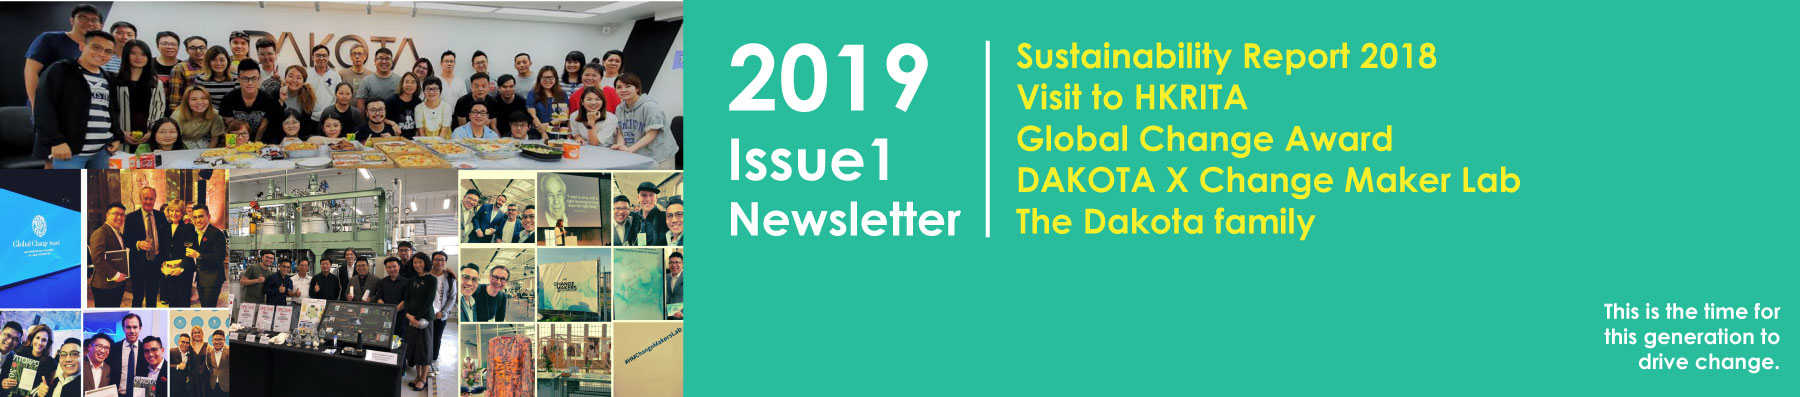 2019 ISSUE1 News Letter